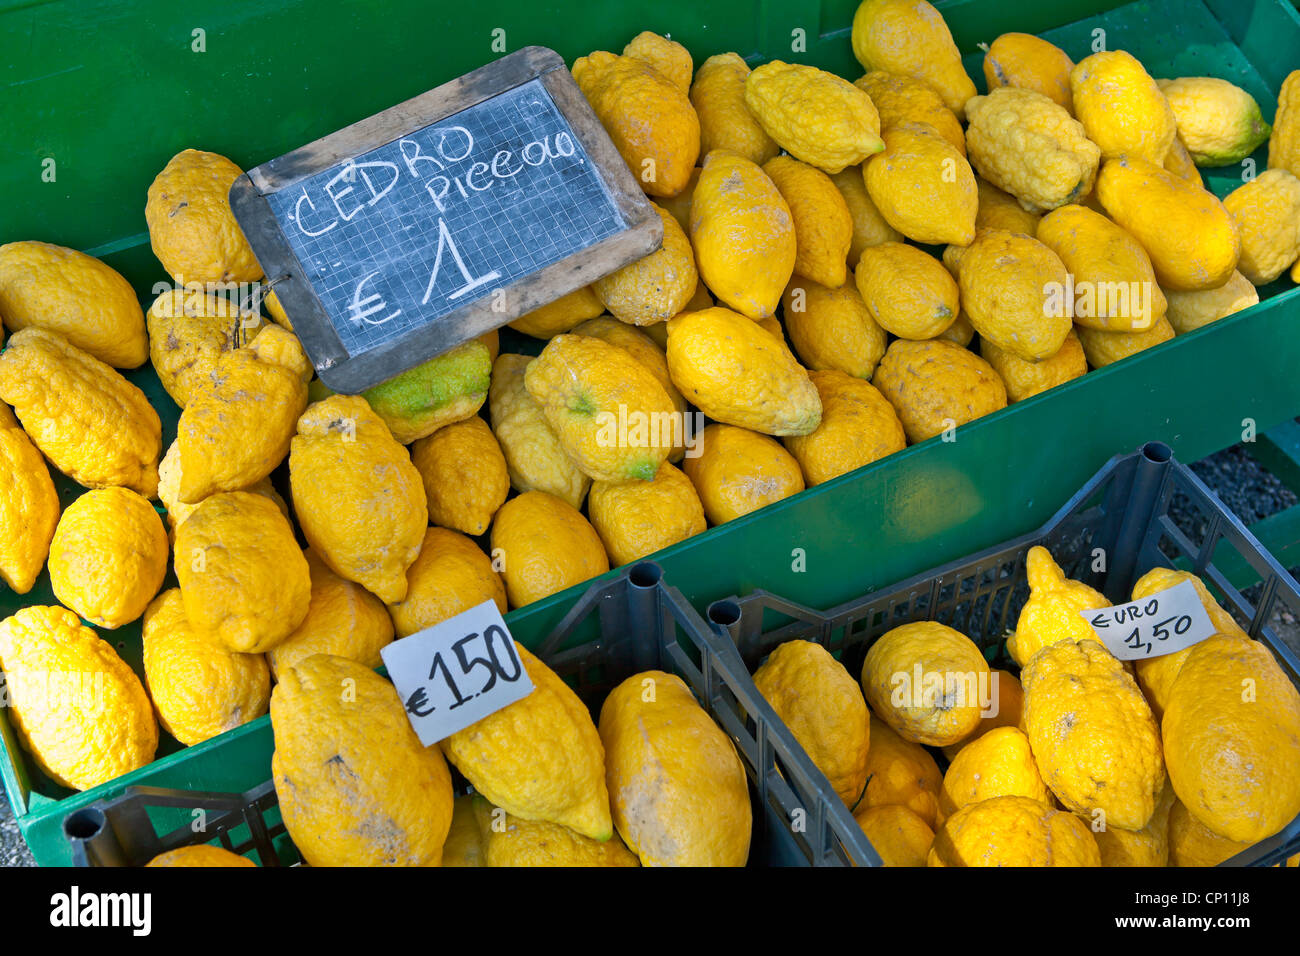 The citron or Cedrat (Citrus medica) is a species of the genus Citrus in the rue family. Stock Photo